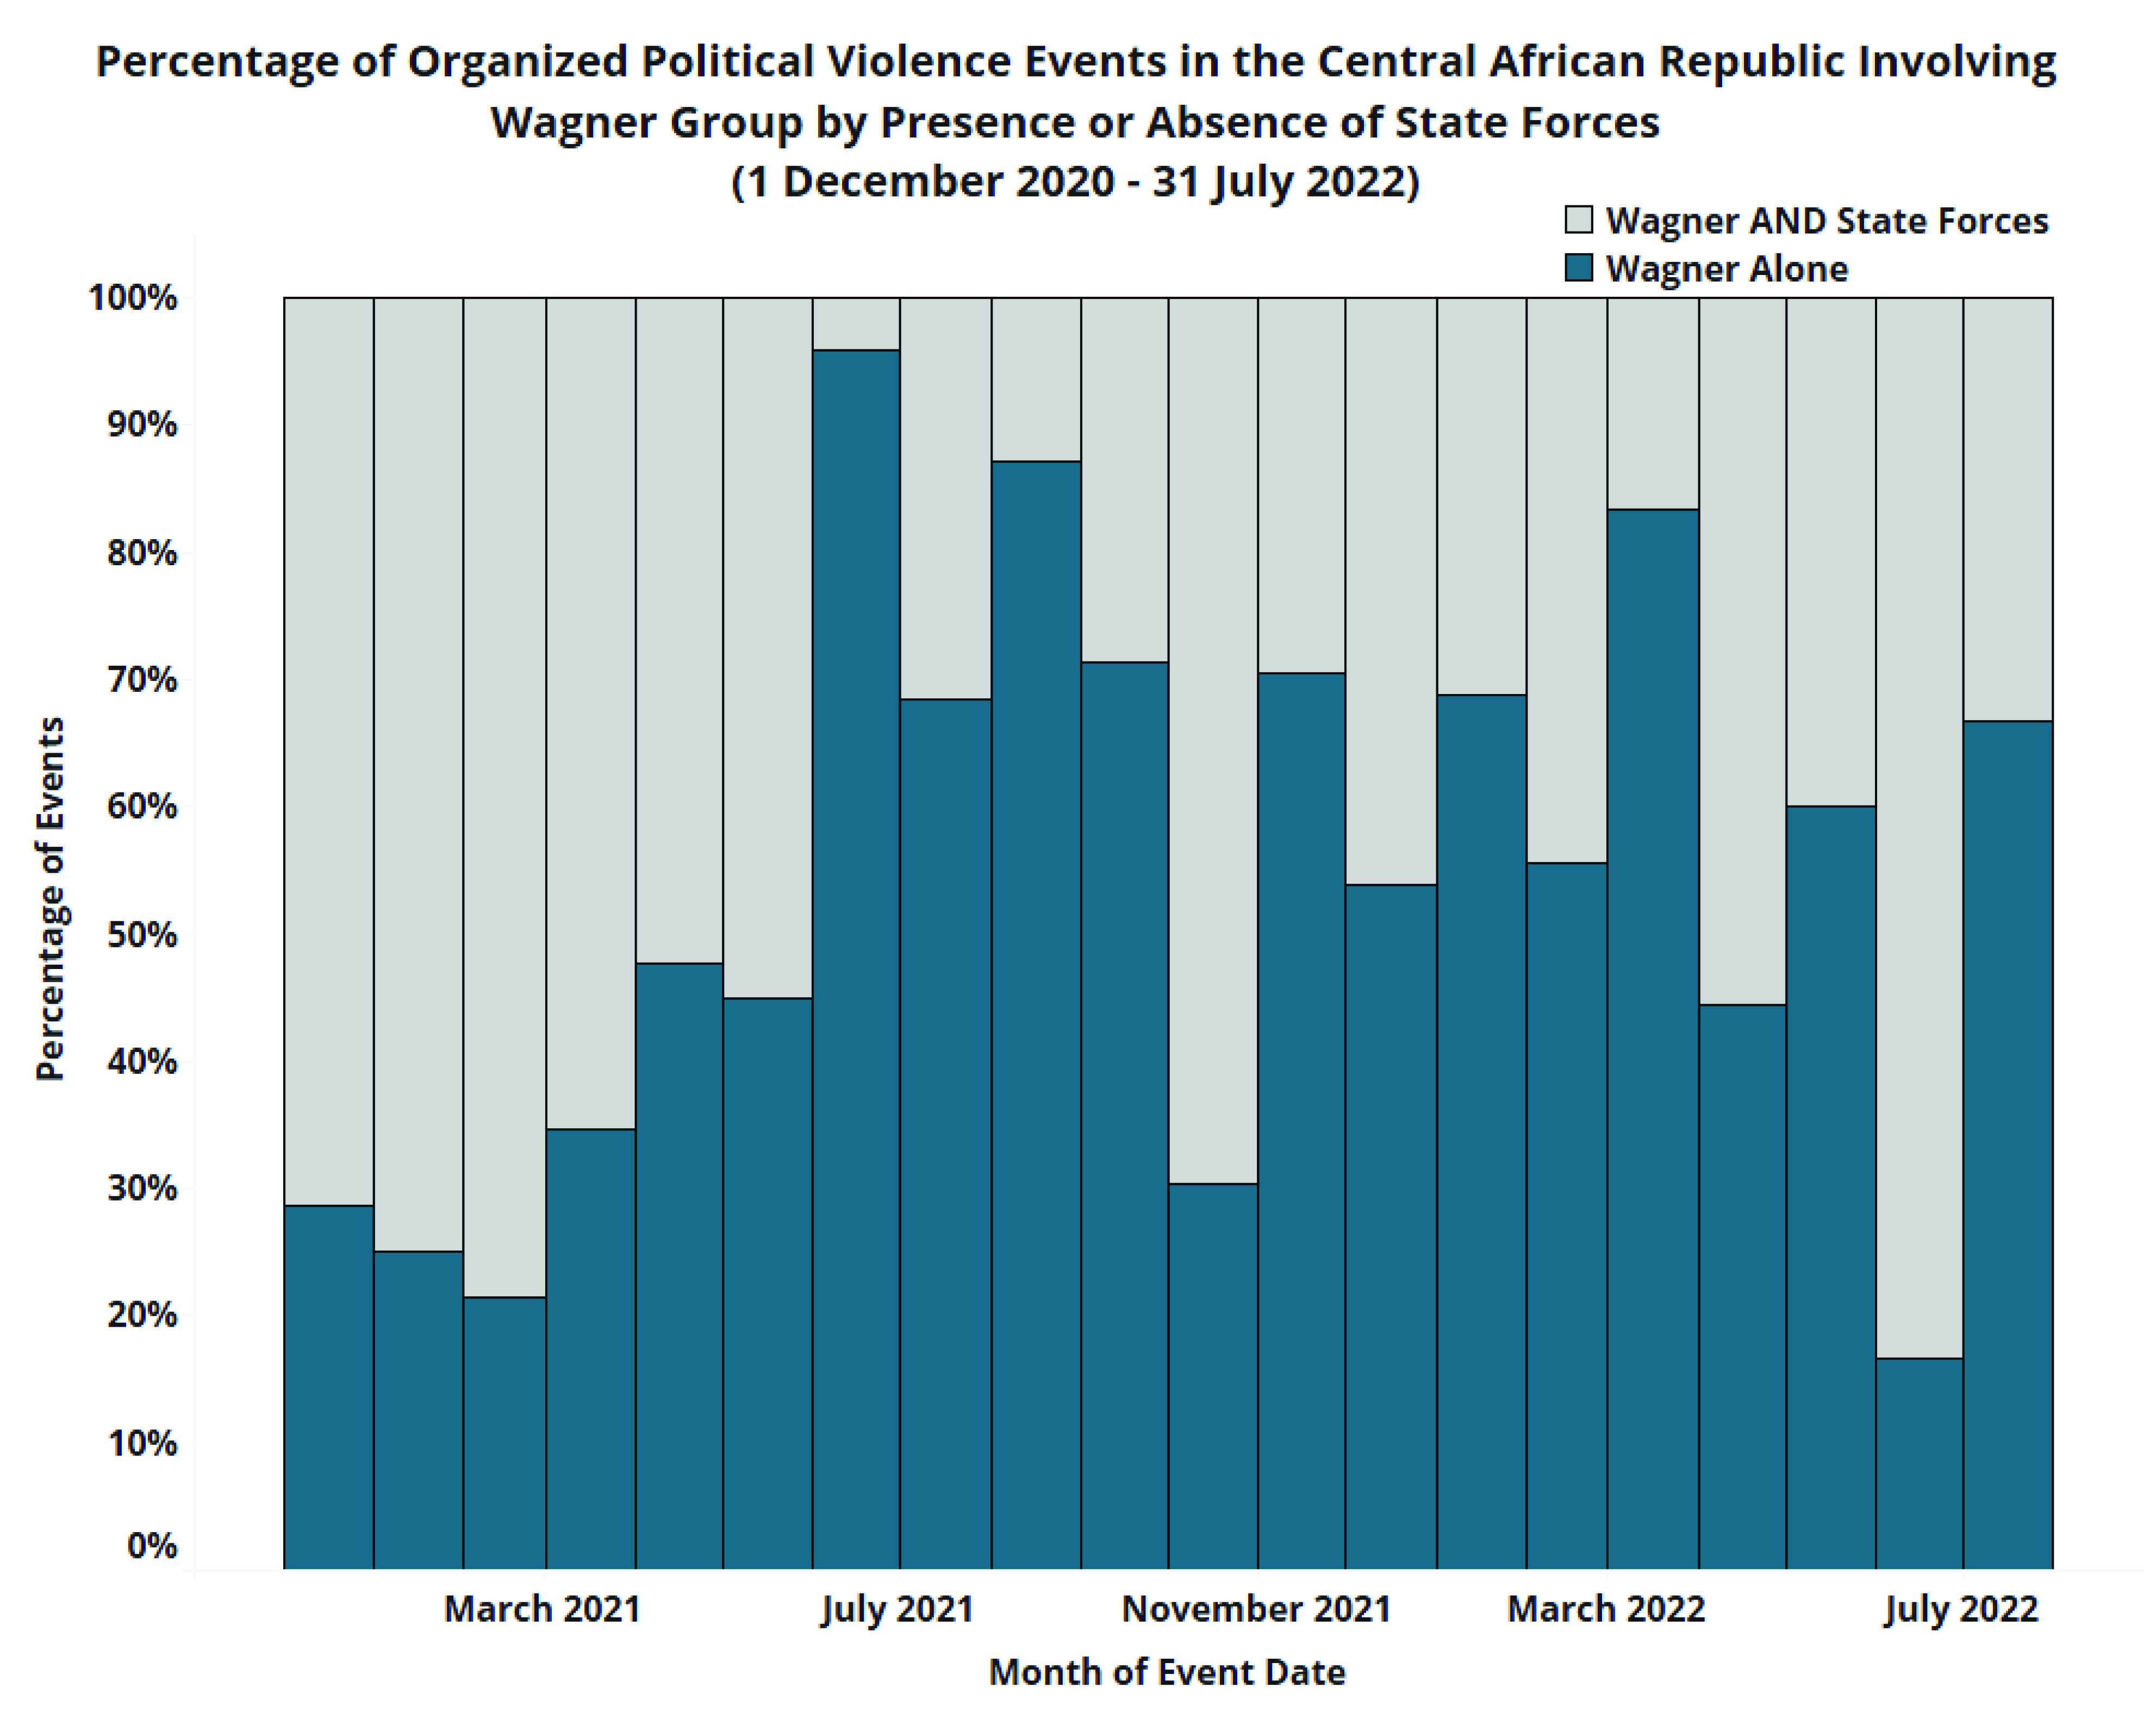 Percentage of Organized Political Violence Events in the Central African Republic Involving Wagner Group by Presence or Absence of State Forces (1 December 2020–31 July 2022)

